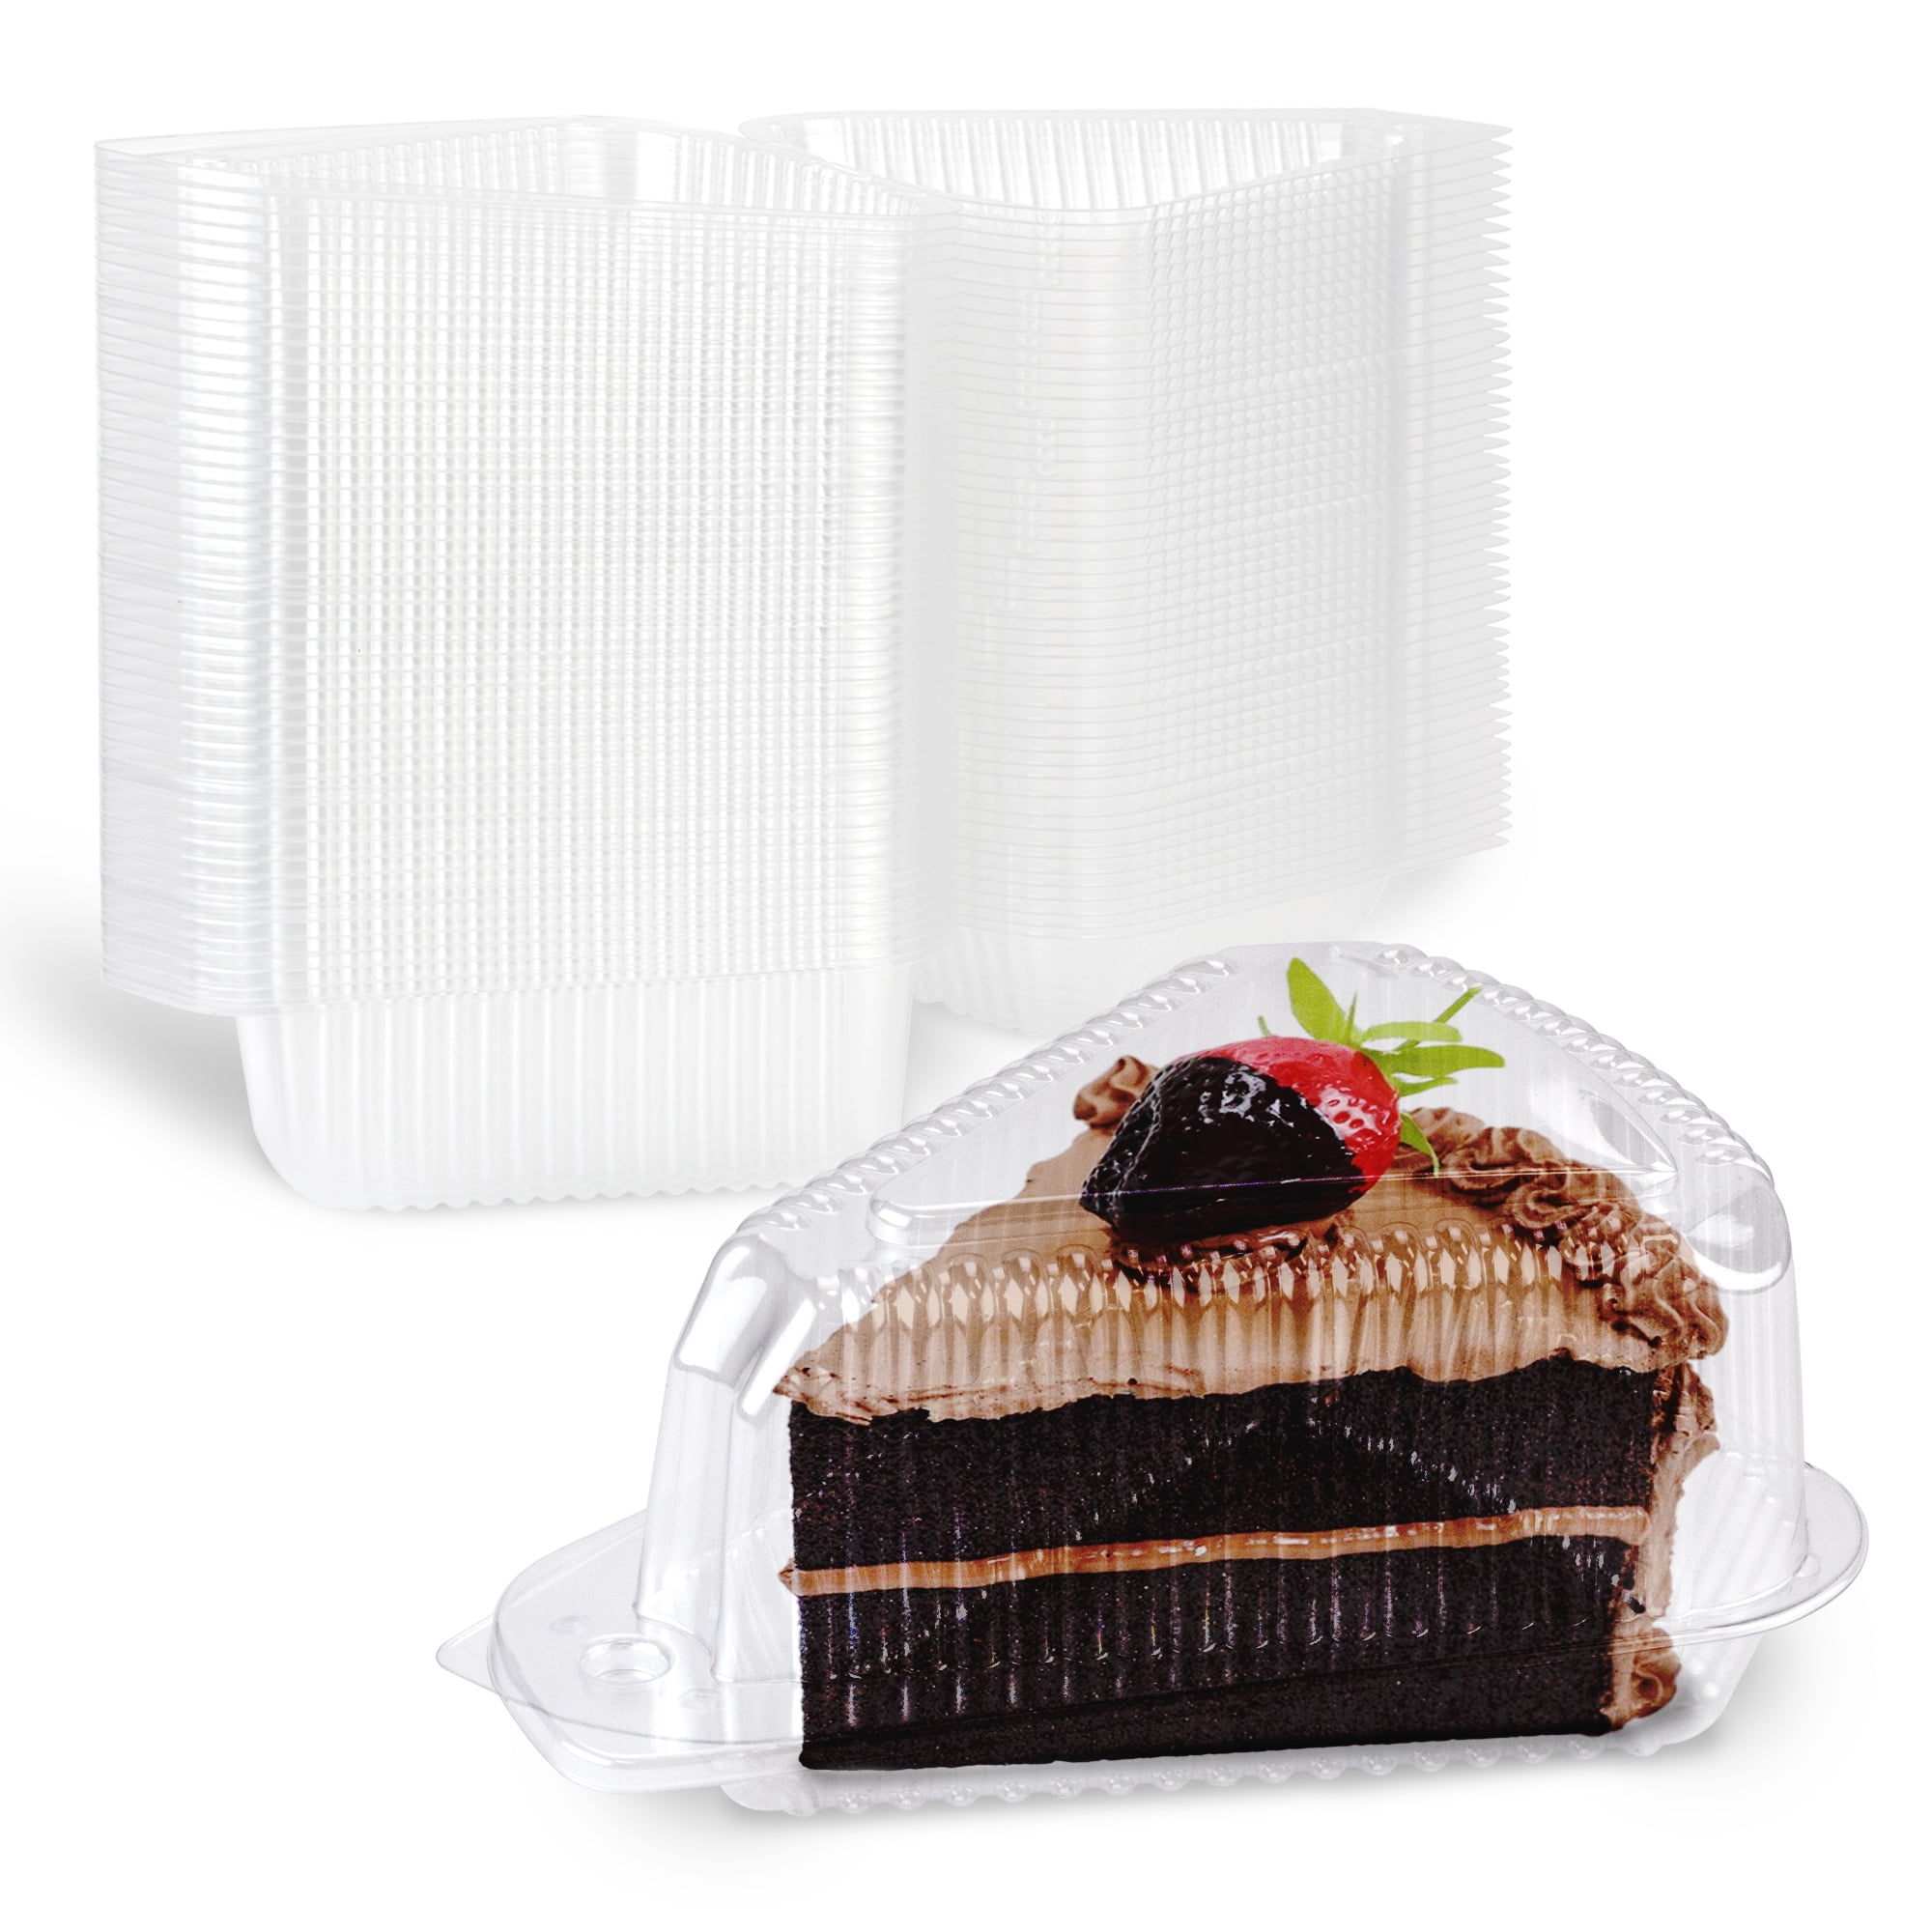 Choice 1/2 Size High Dome Sheet Cake Display Container with Clear Dome Lid  - 5/Pack